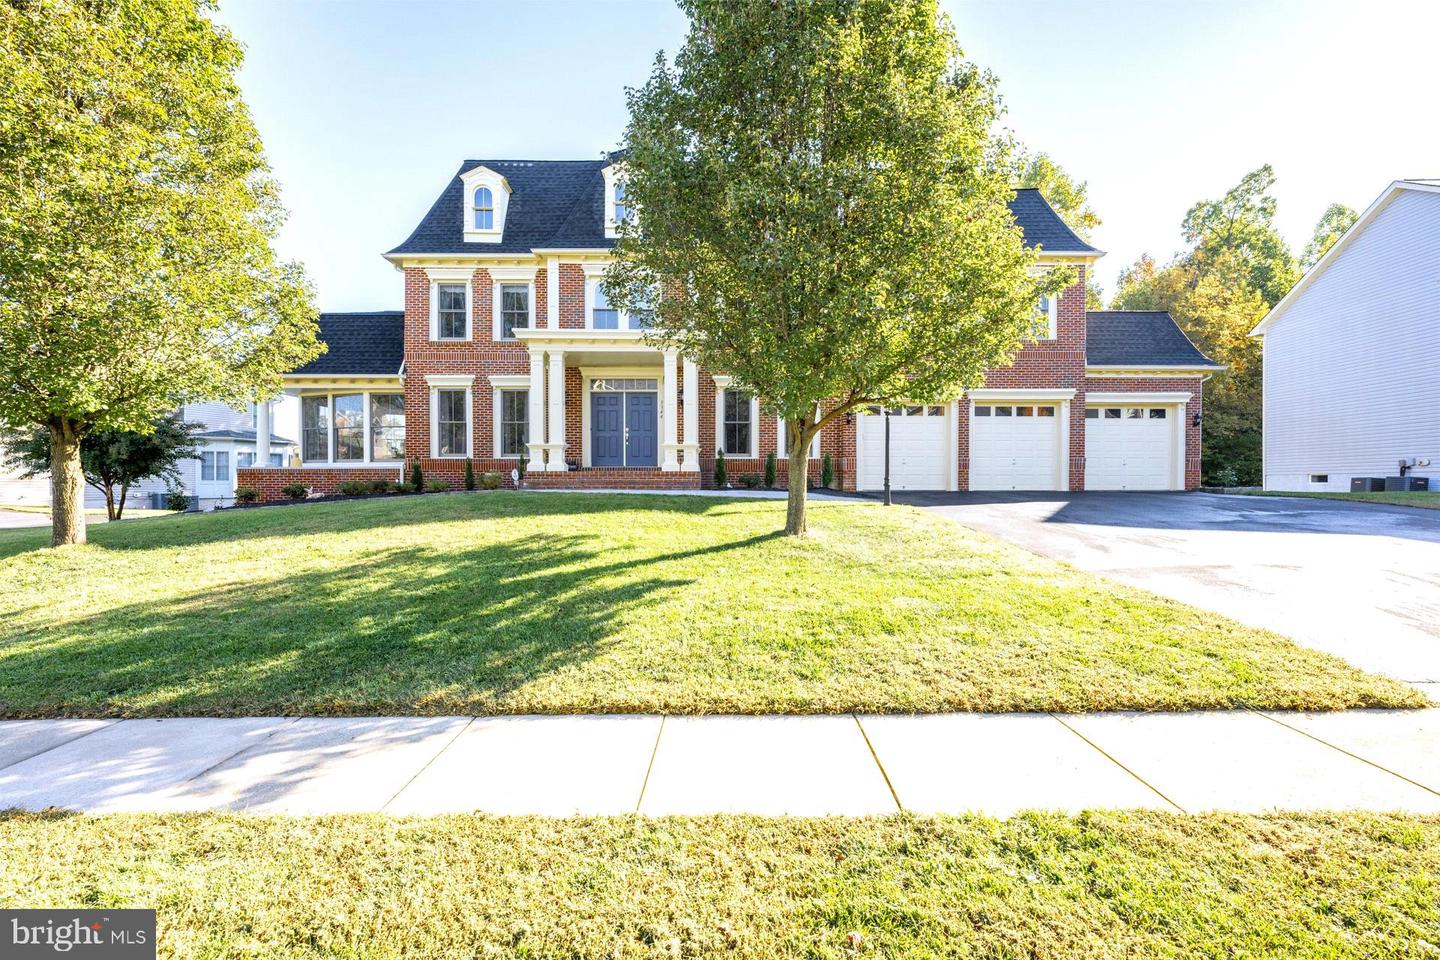 3344 DONDIS CREEK DR, TRIANGLE, Virginia 22172, 6 Bedrooms Bedrooms, ,6 BathroomsBathrooms,Residential,For sale,3344 DONDIS CREEK DR,VAPW2066300 MLS # VAPW2066300